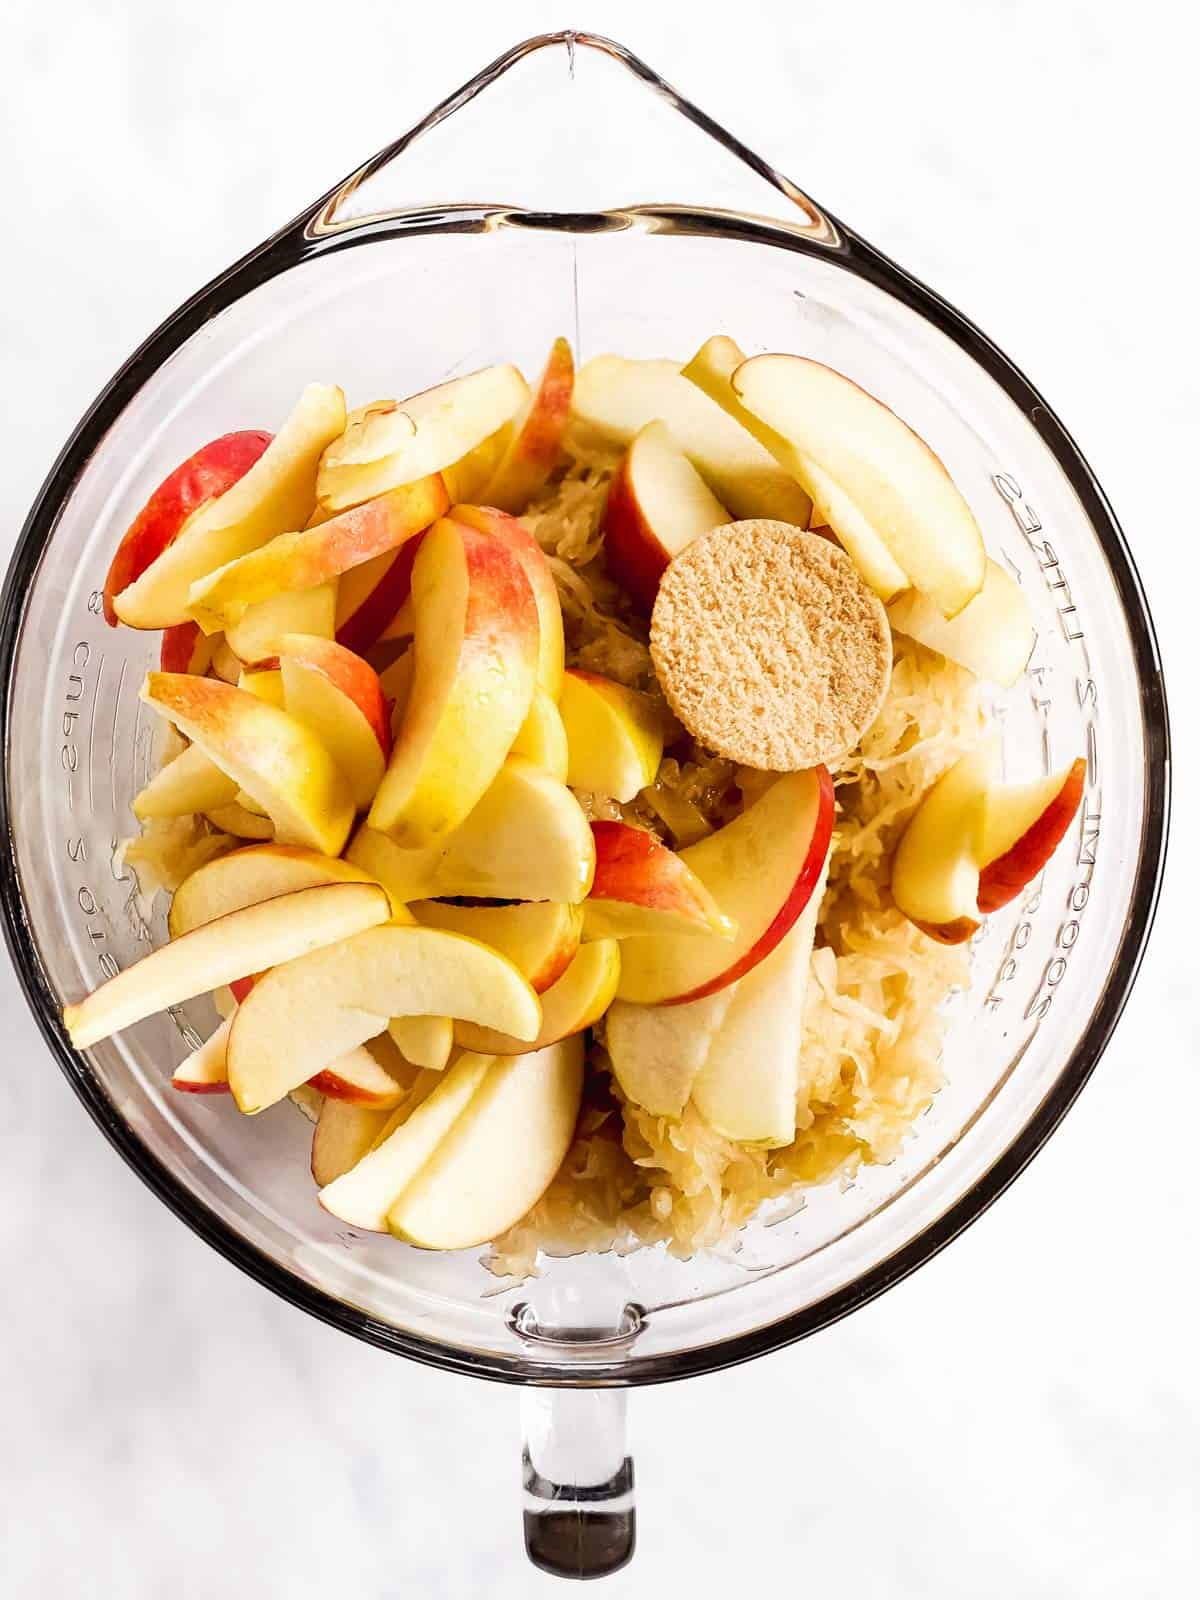 glass bowl with apples, sauerkraut, maple syrup and brown sugar